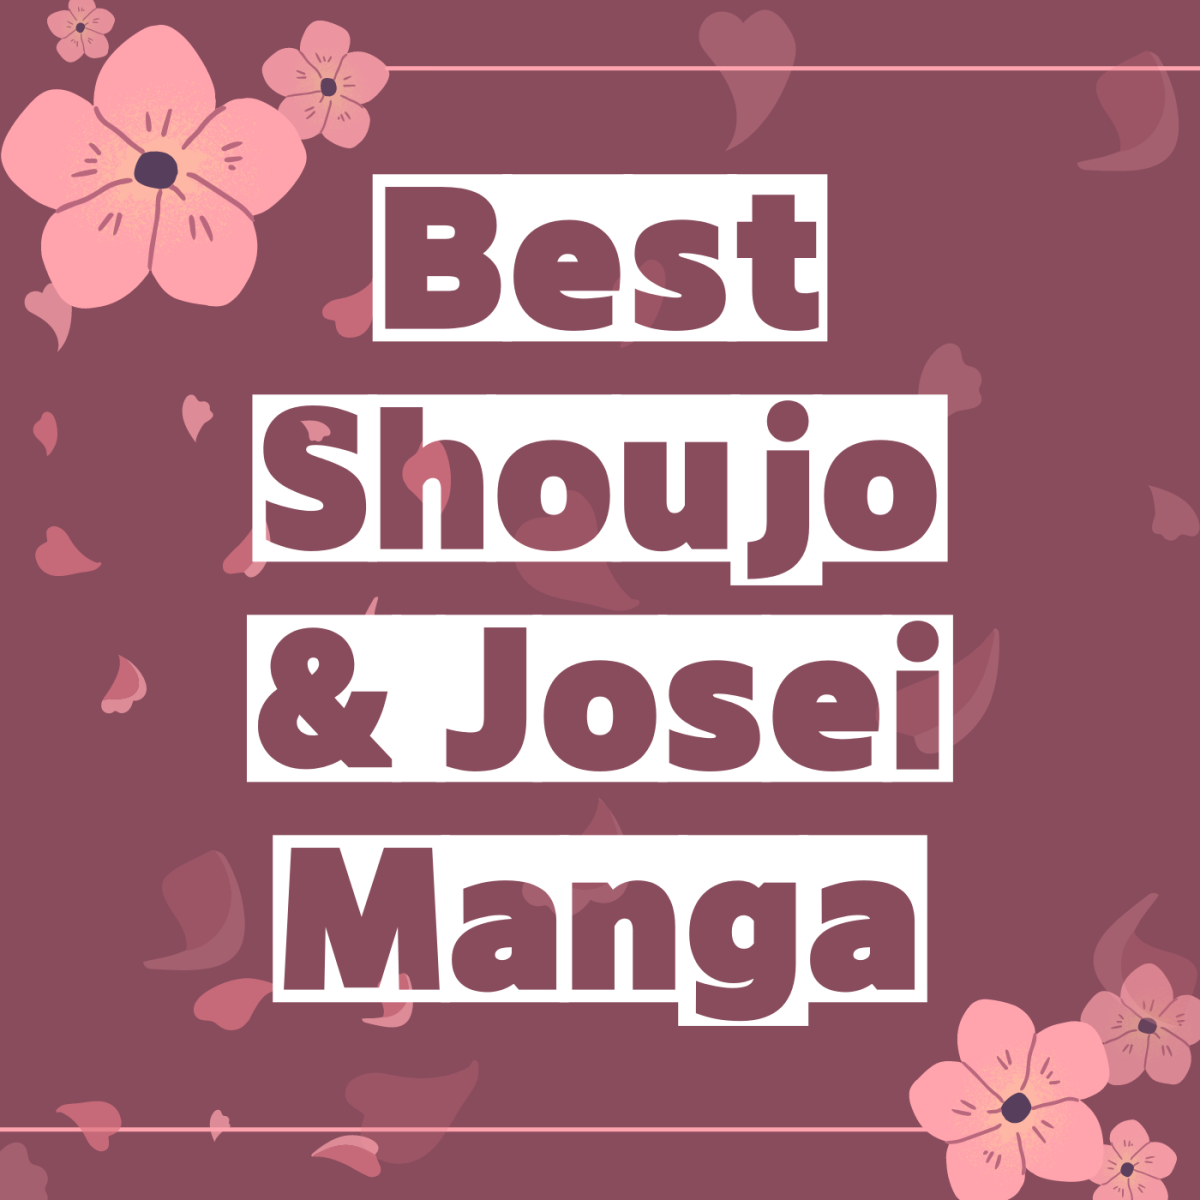 Discover some top manga recommendations in the shoujo and josei genres, from slice of life series to romances and comedies!